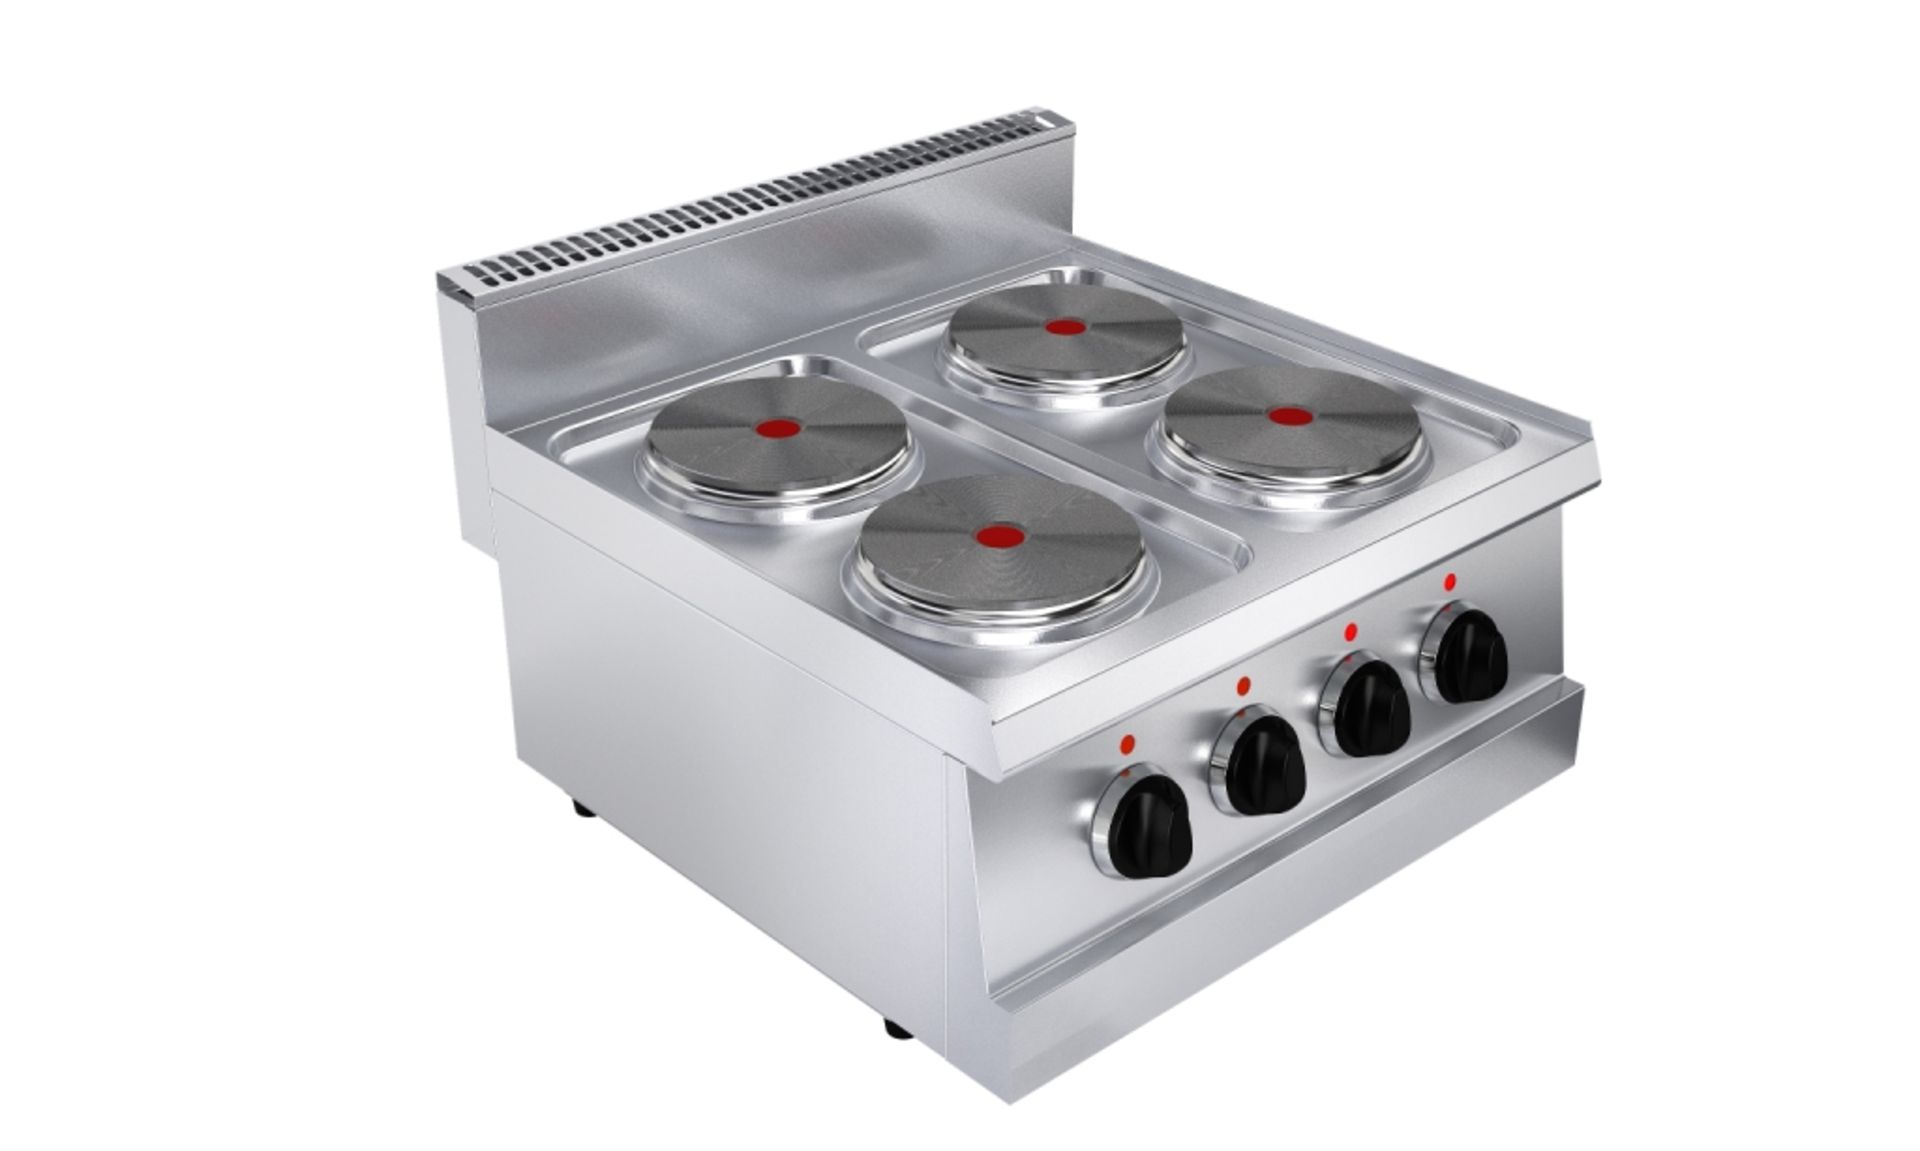 Boiling top with 4 round plates - 4 x 1.5kW - 600W - Electric - RG6K200E